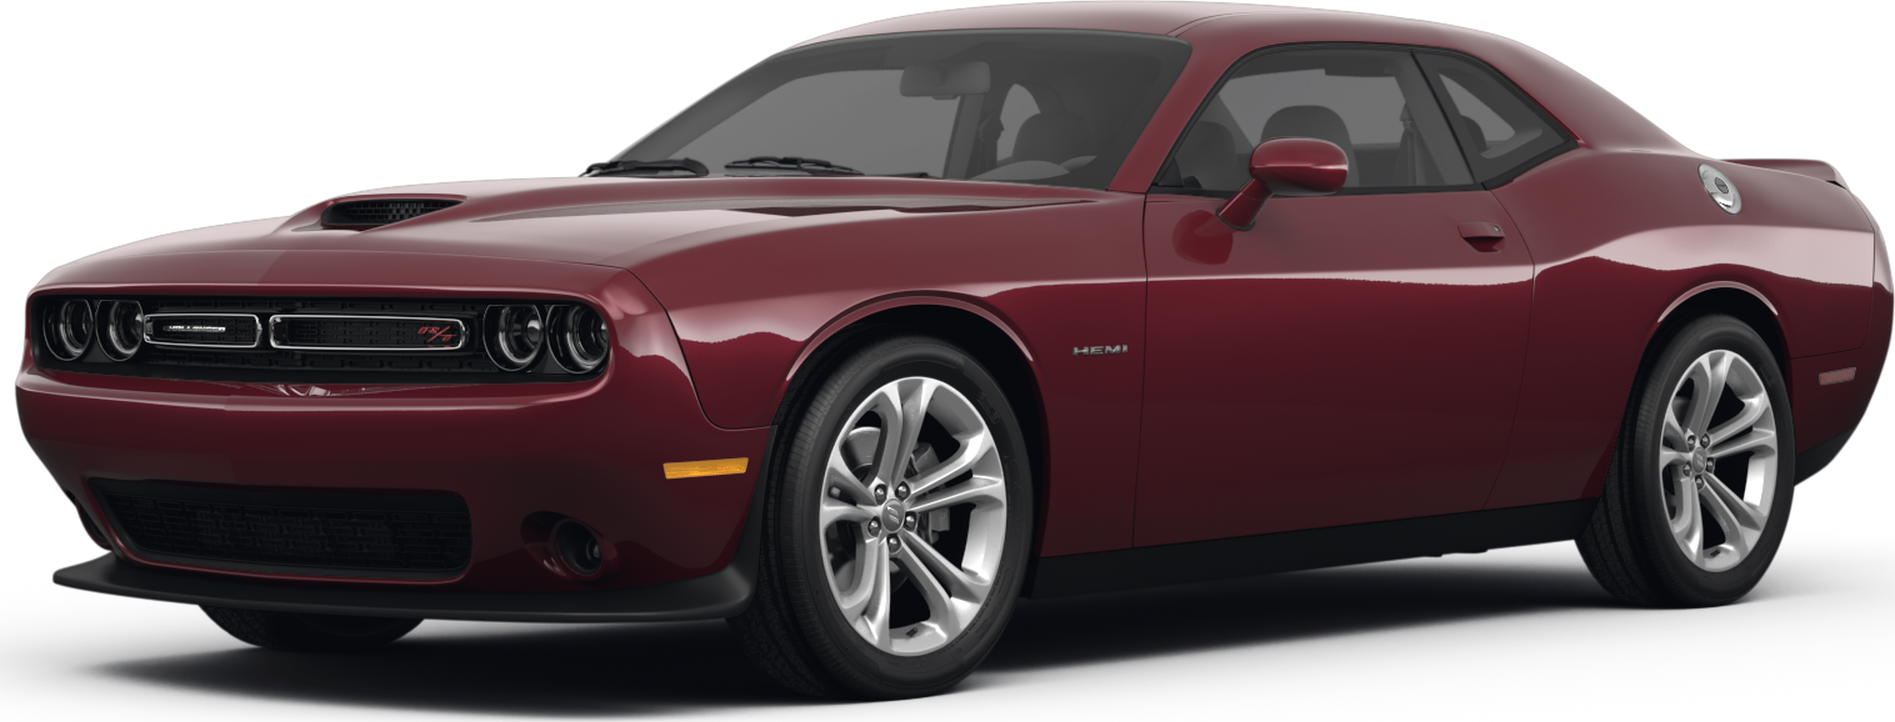 Engine Performance and Fuel Efficiency of the 2022 Dodge